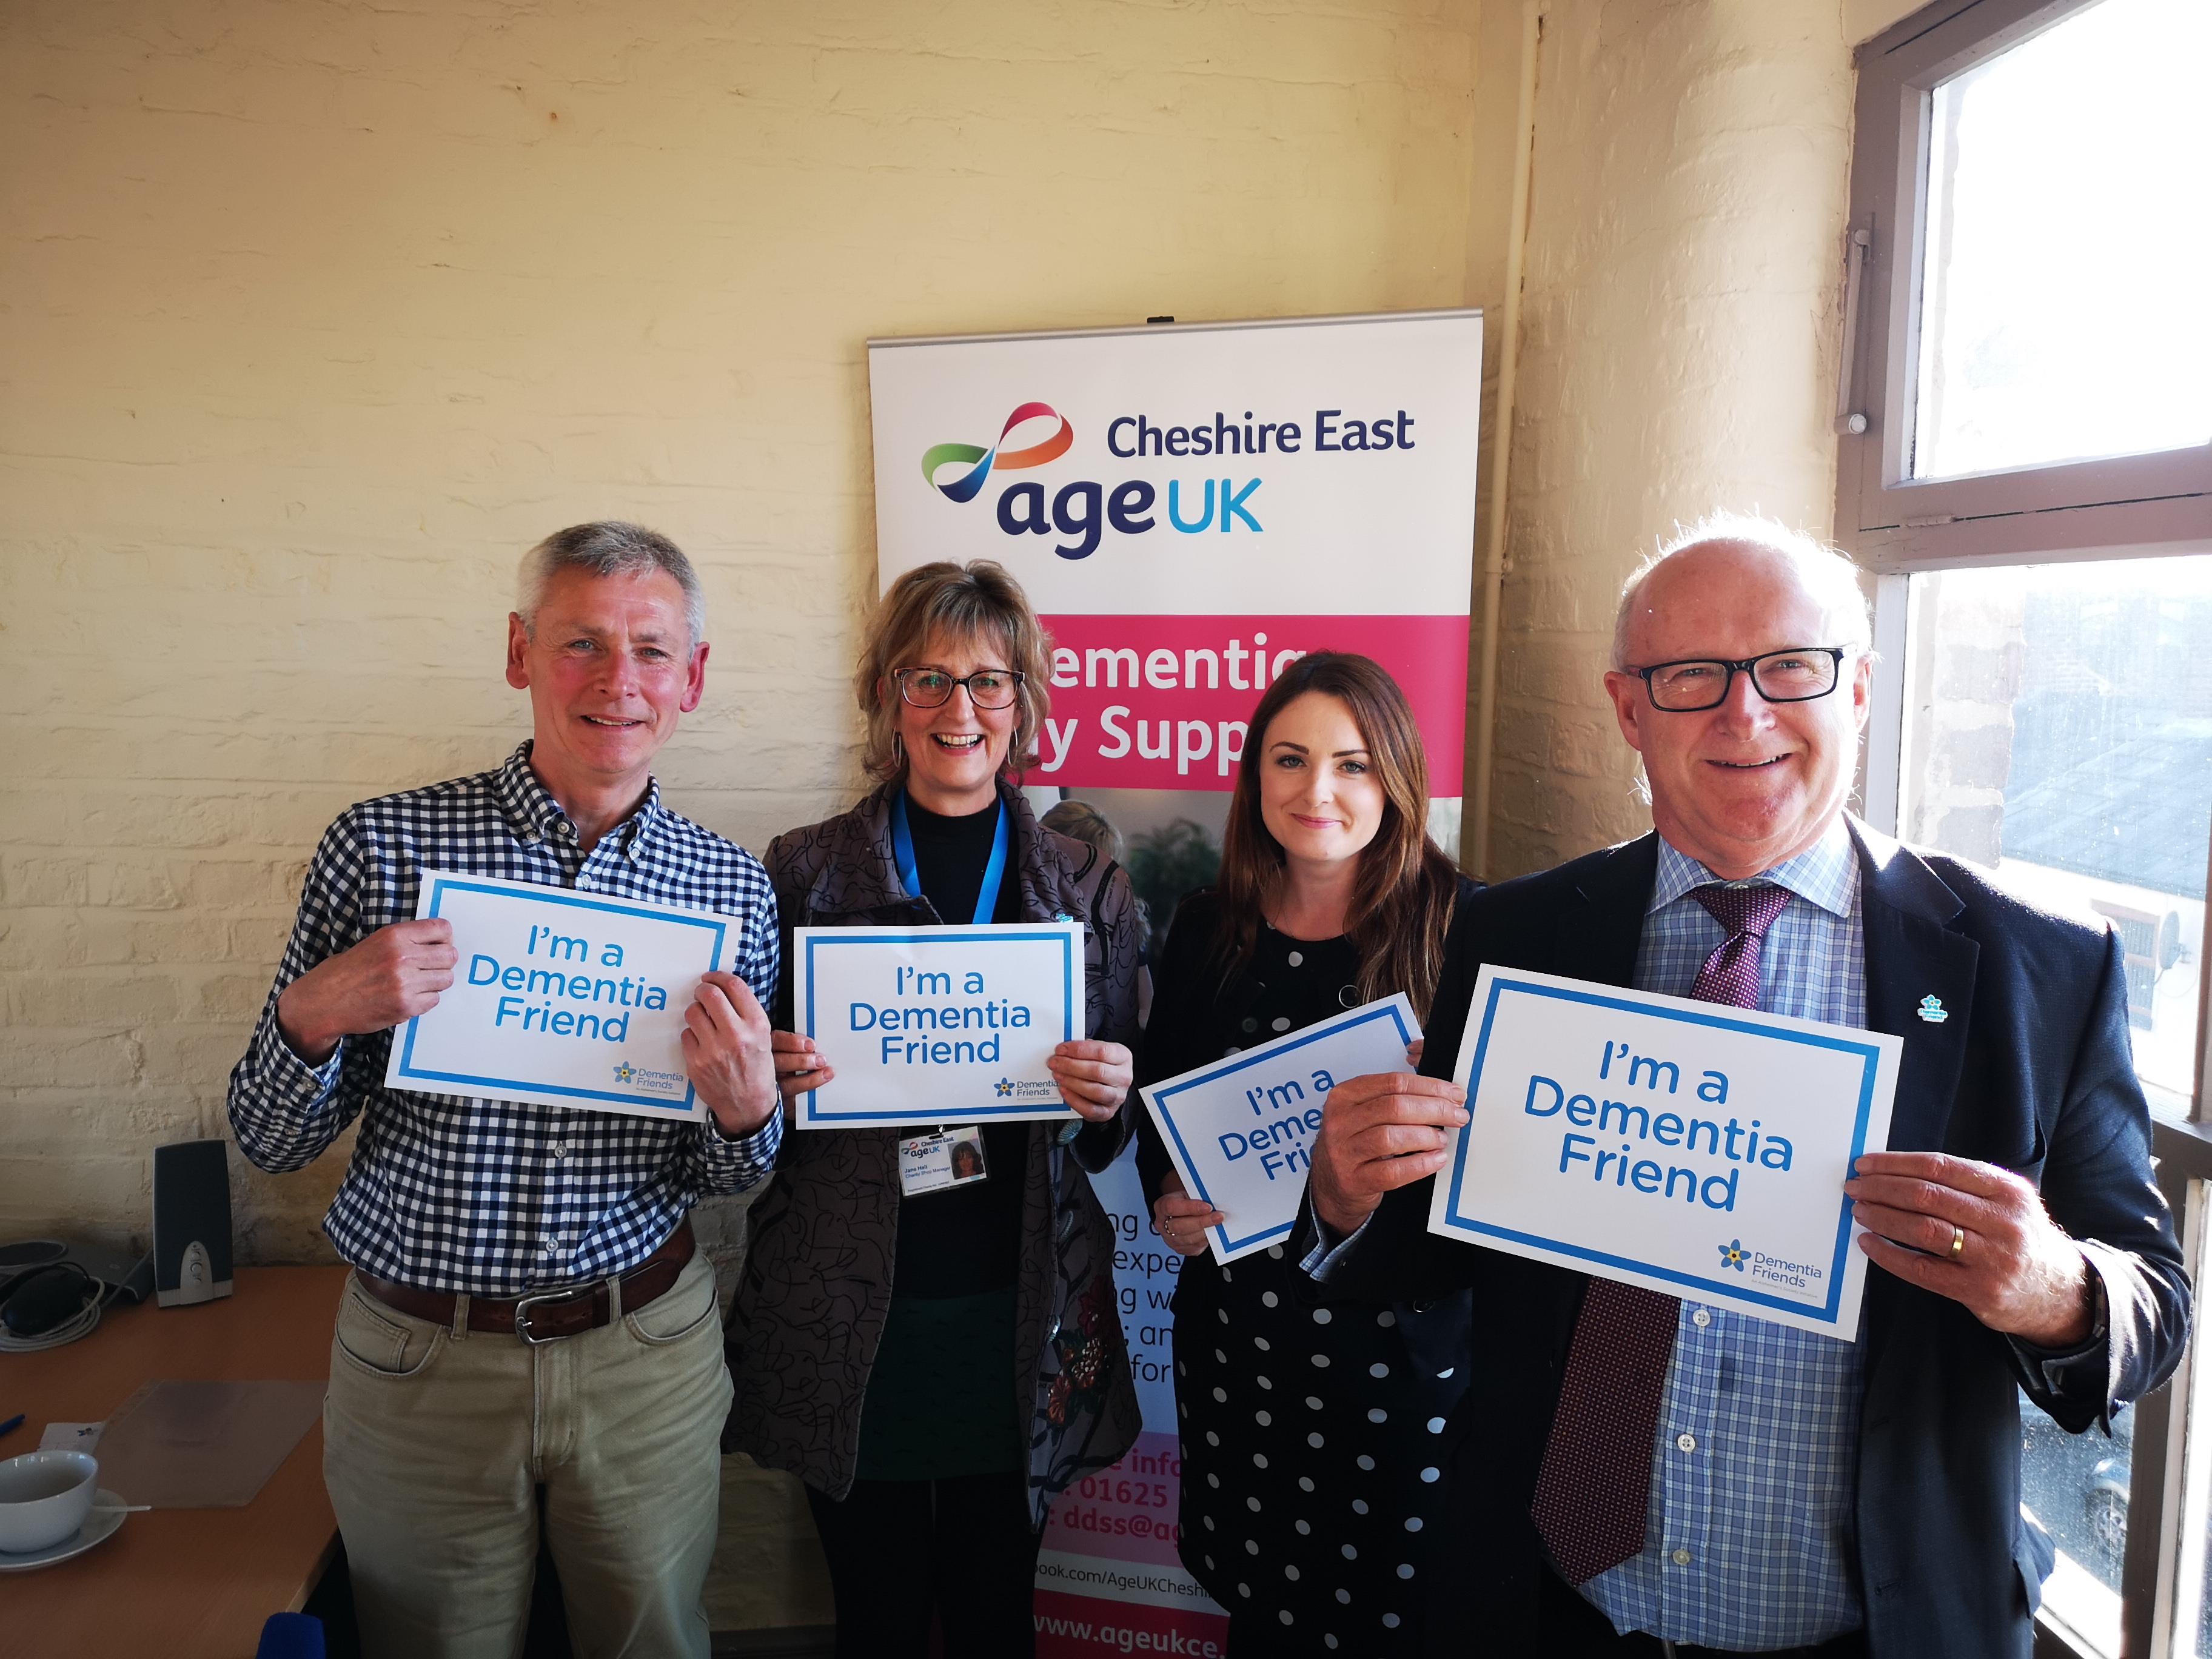 (L-R) Alan Stevenson, volunteer in the Charity’s Dementia Club, Jane Hall, Manager of the Charity’s Poynton Shop, together with Victoria Greenwood and Mark Whittell from North West Mediation Solutions, after becoming dementia friends.